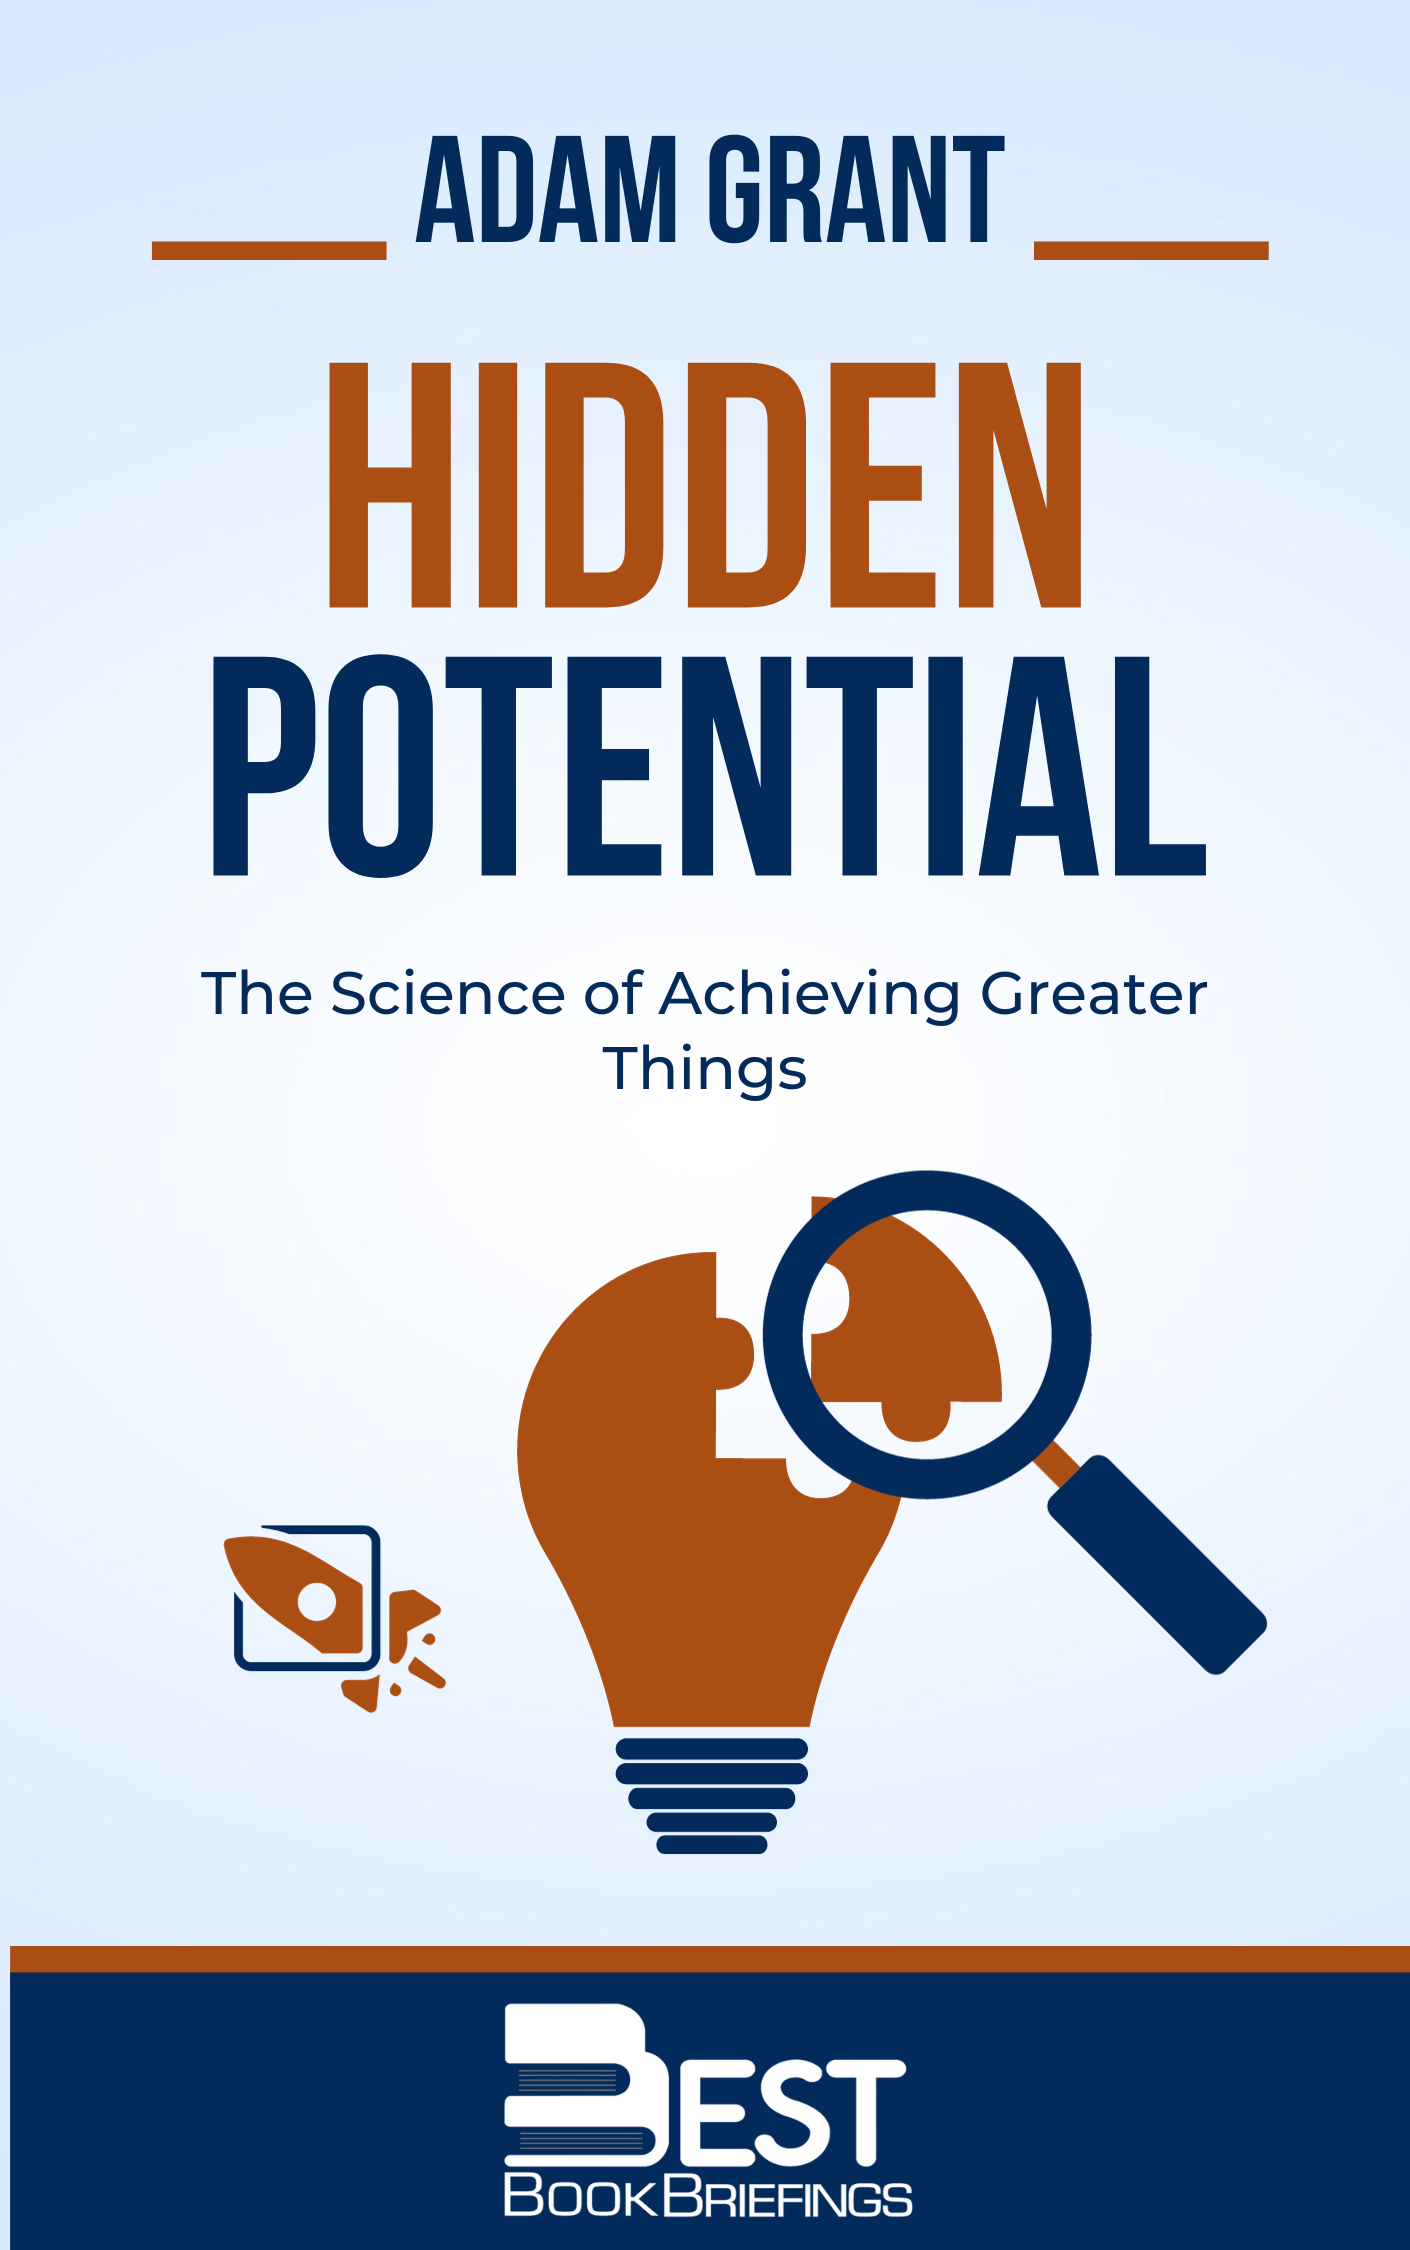 Hidden Potential offers a new framework for raising aspirations and exceeding expectations. Adam Grant weaves together groundbreaking evidence, surprising insights, and vivid storytelling that takes us from the classroom to the boardroom, the playground to the Olympics, and underground to outer space. He shows that progress depends less on how hard you 